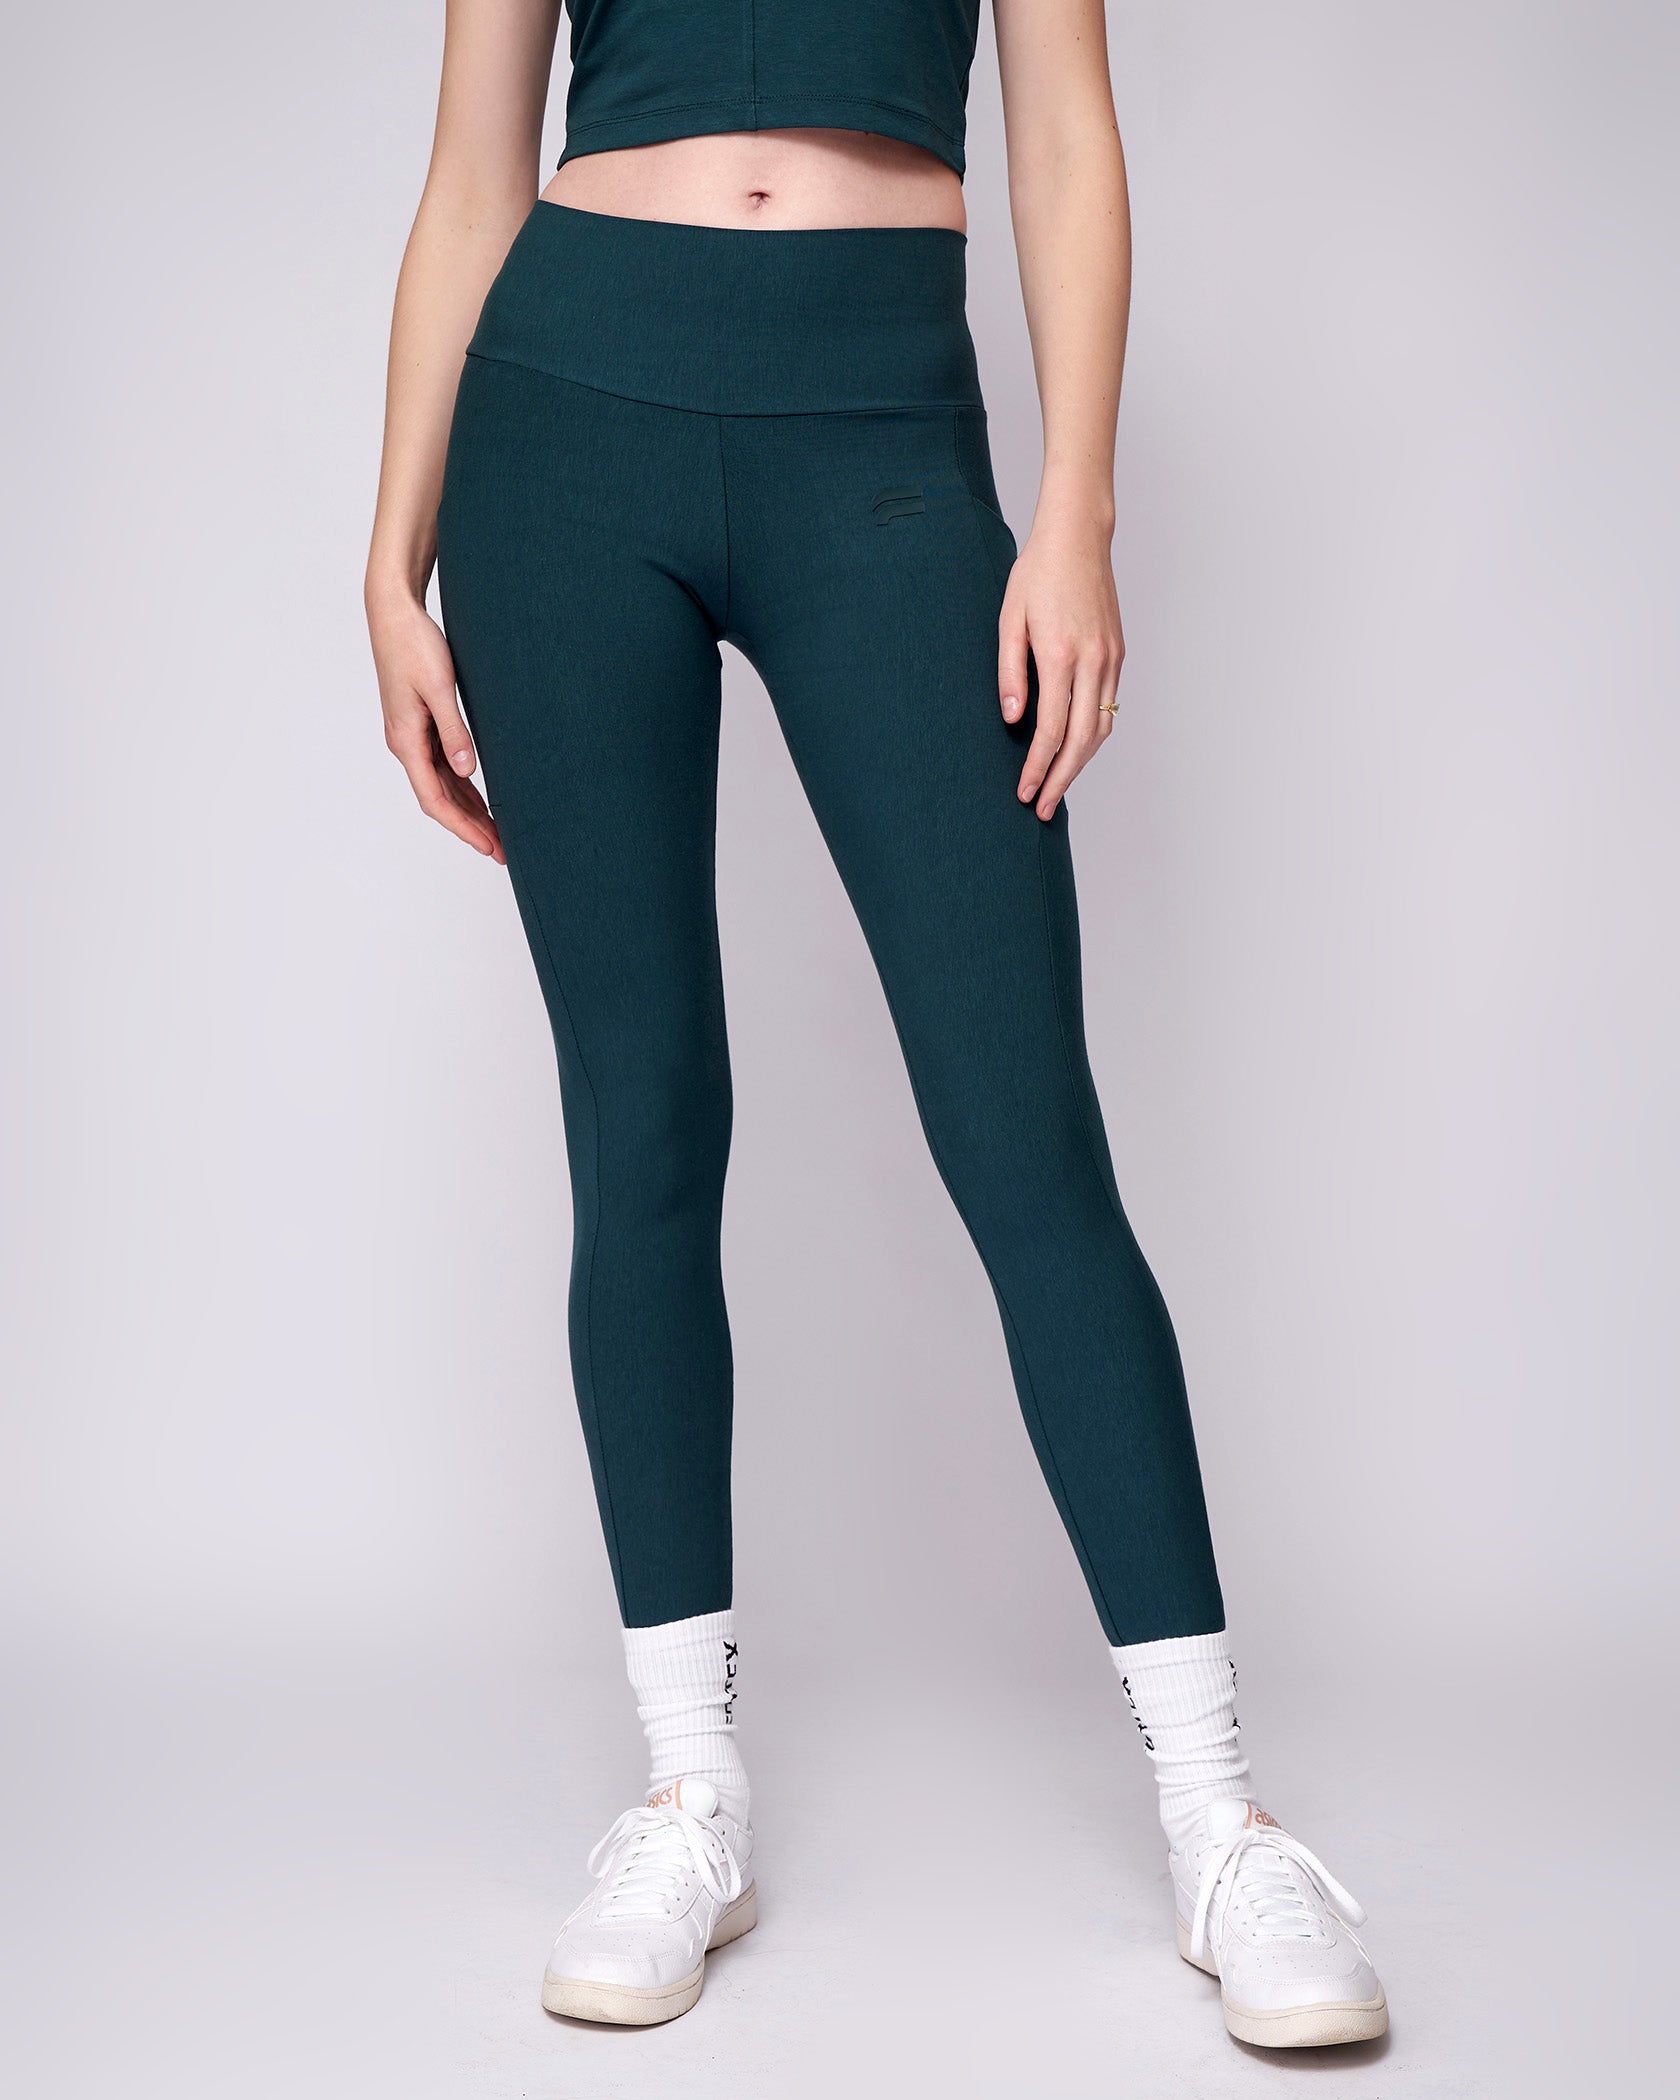 Ribbed Leggings – Dusty Pink – Emerald Fitness